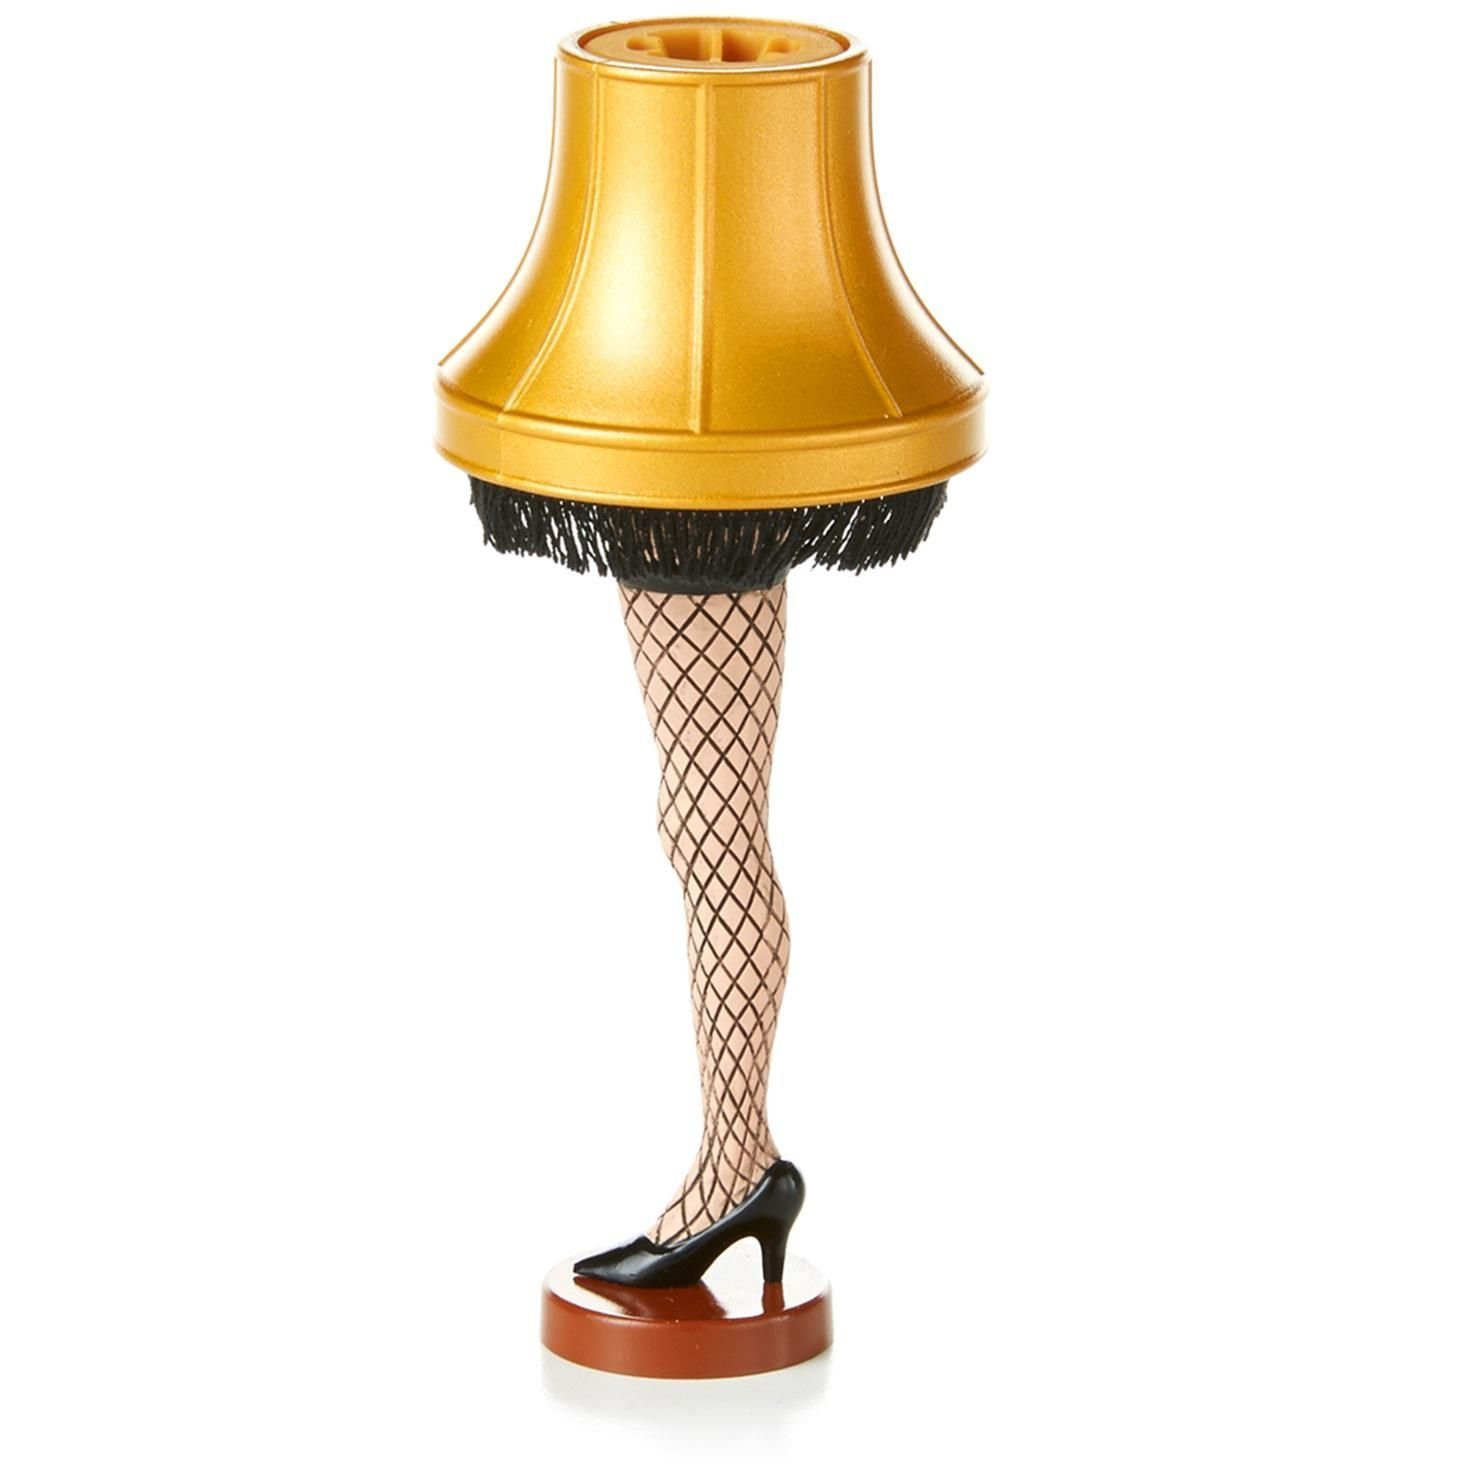 A Christmas Story Leg Lamp
 15 Last Minute Gifts for Under $20